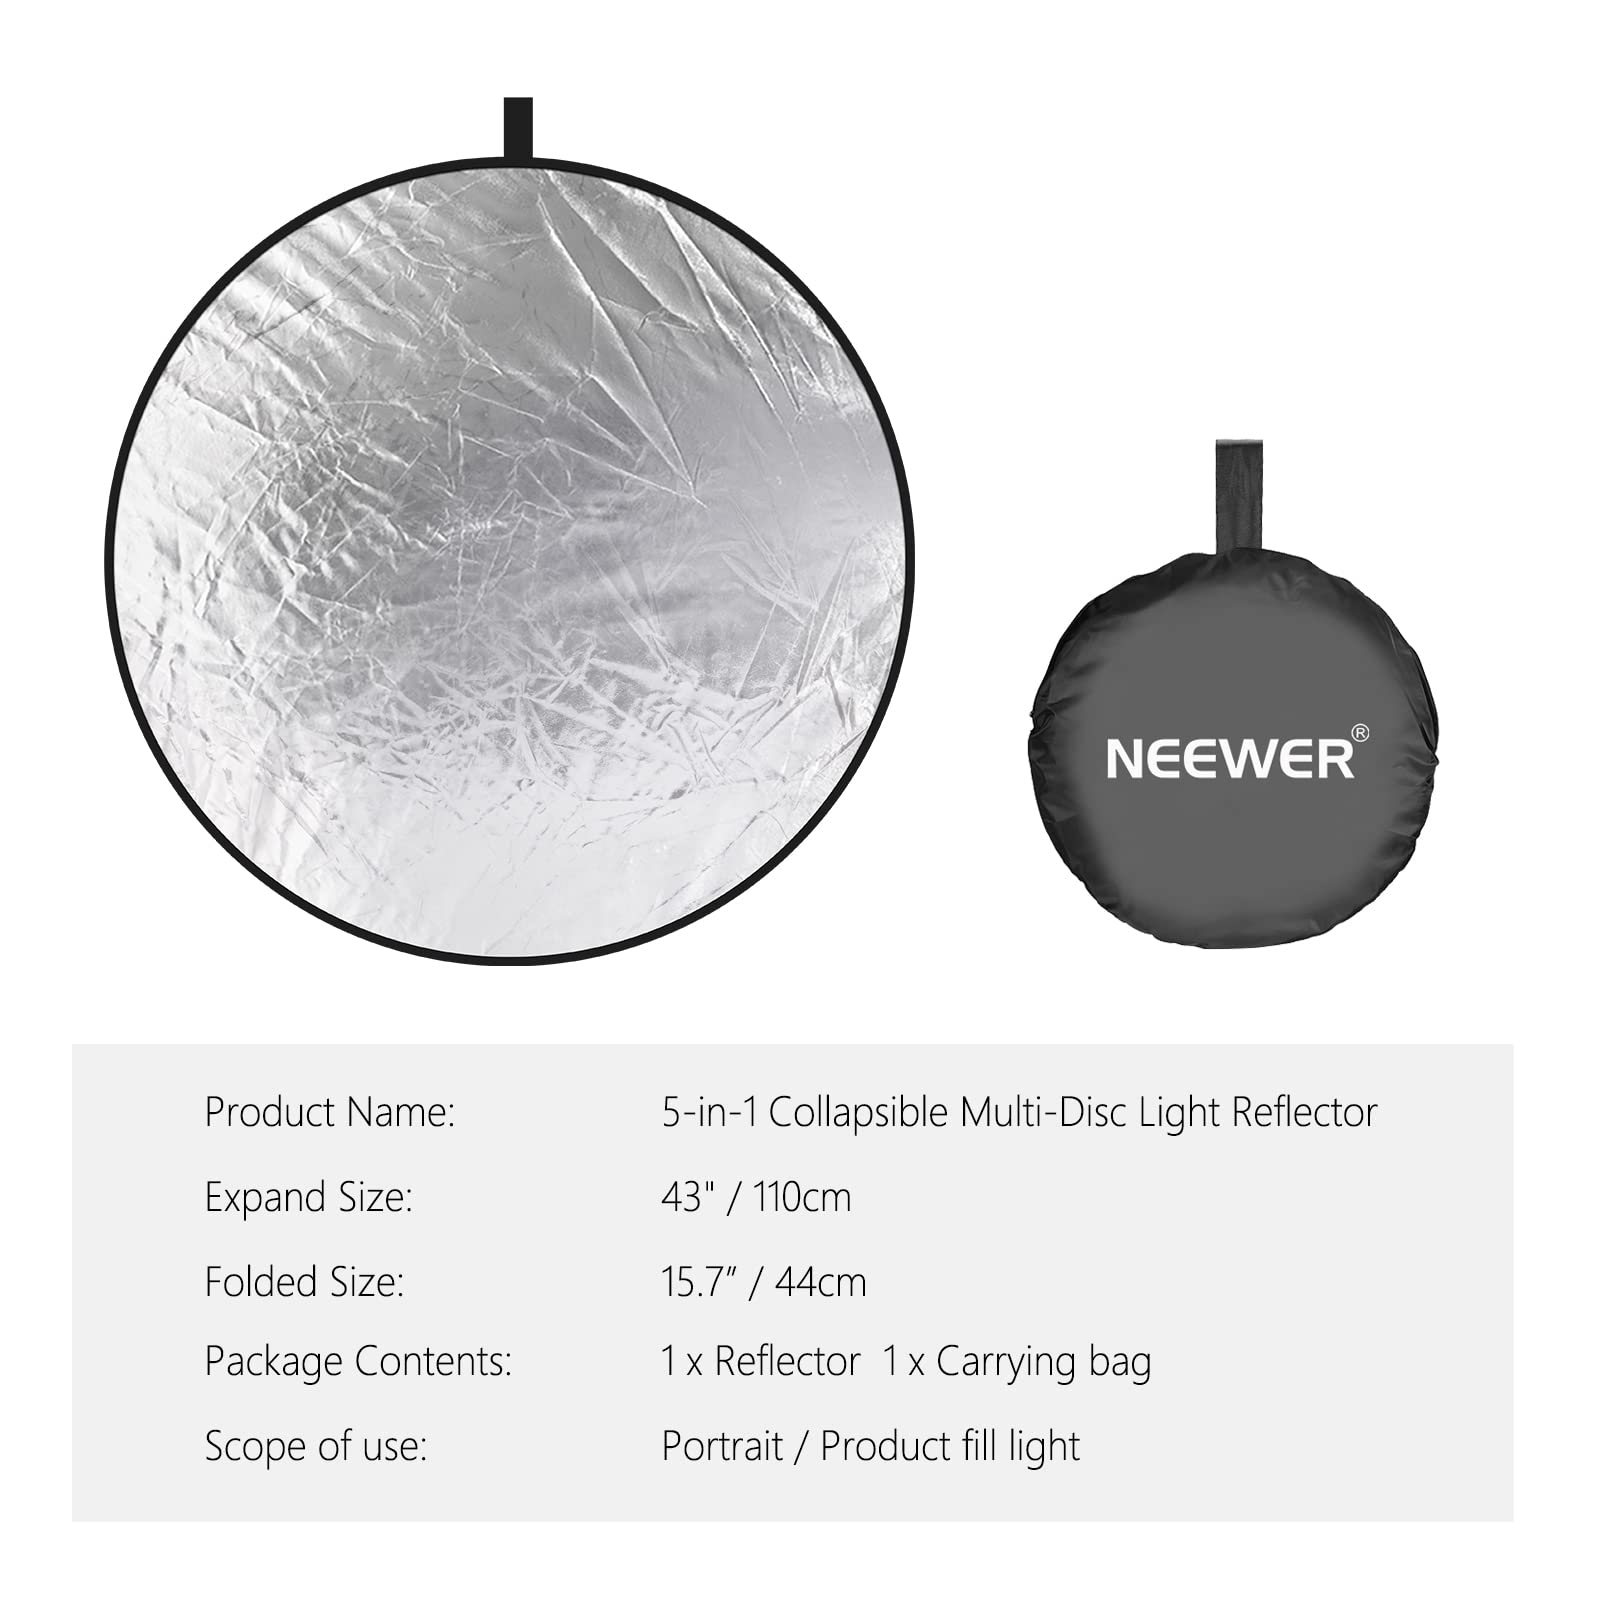 NEEWER 43 Inch/110 Centimeter Light Reflector Light Diffuser 5 in 1 Collapsible Multi Disc with Bag - Translucent, Silver, Gold, White, and Black for Studio Photography Lighting and Outdoor Lighting